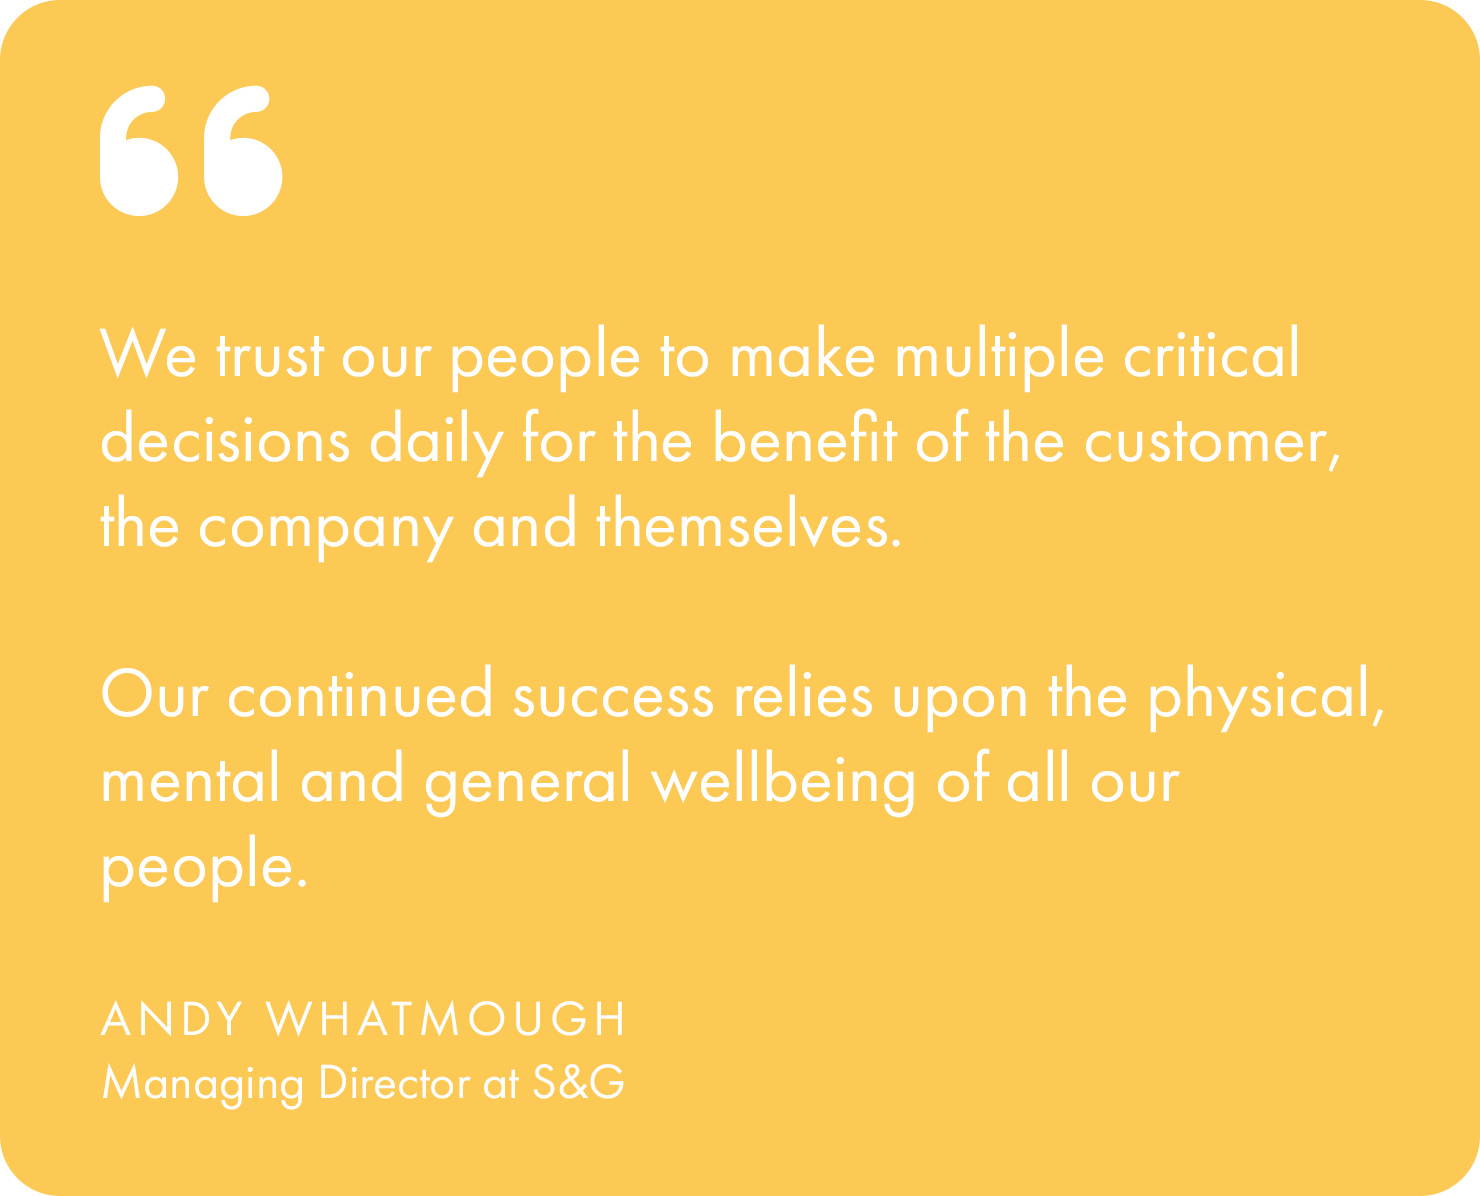 “We trust our people to make multiple critical decisions daily for the benefit of the customer, the company and themselves. Our continued success relies upon the physical, mental and general well-being of all our people.”